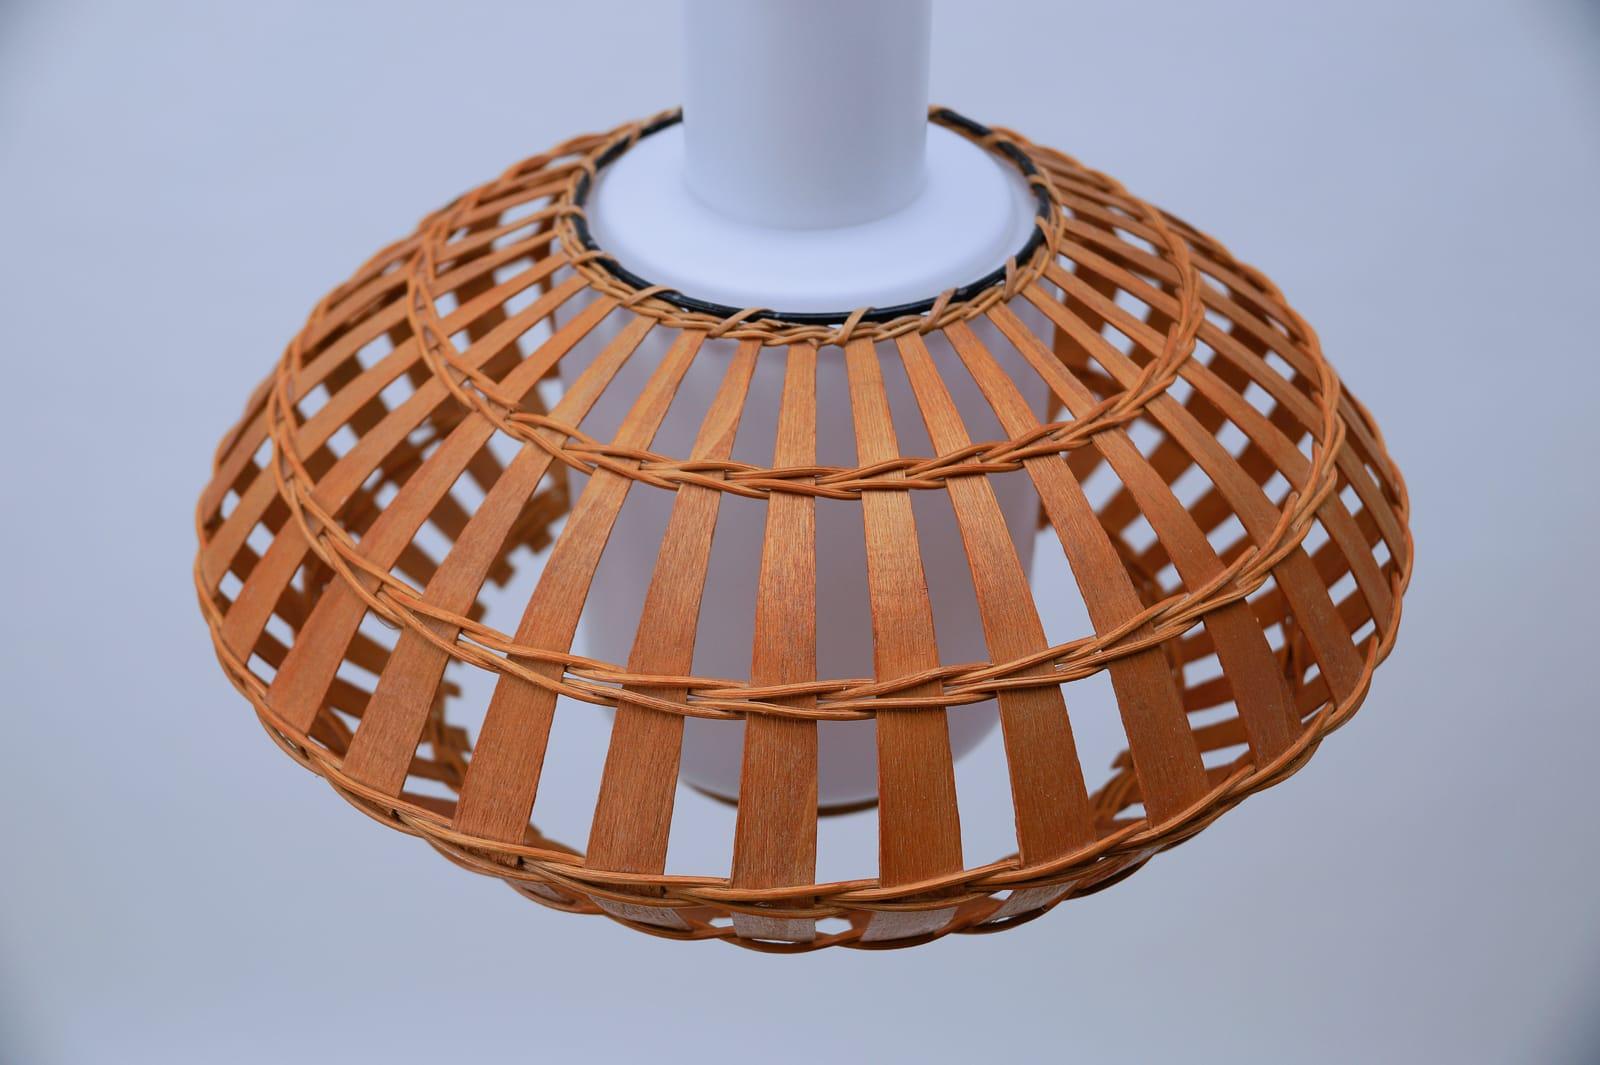 Opaline Glass and Wicker Ceiling Lamp, 1960s For Sale 3